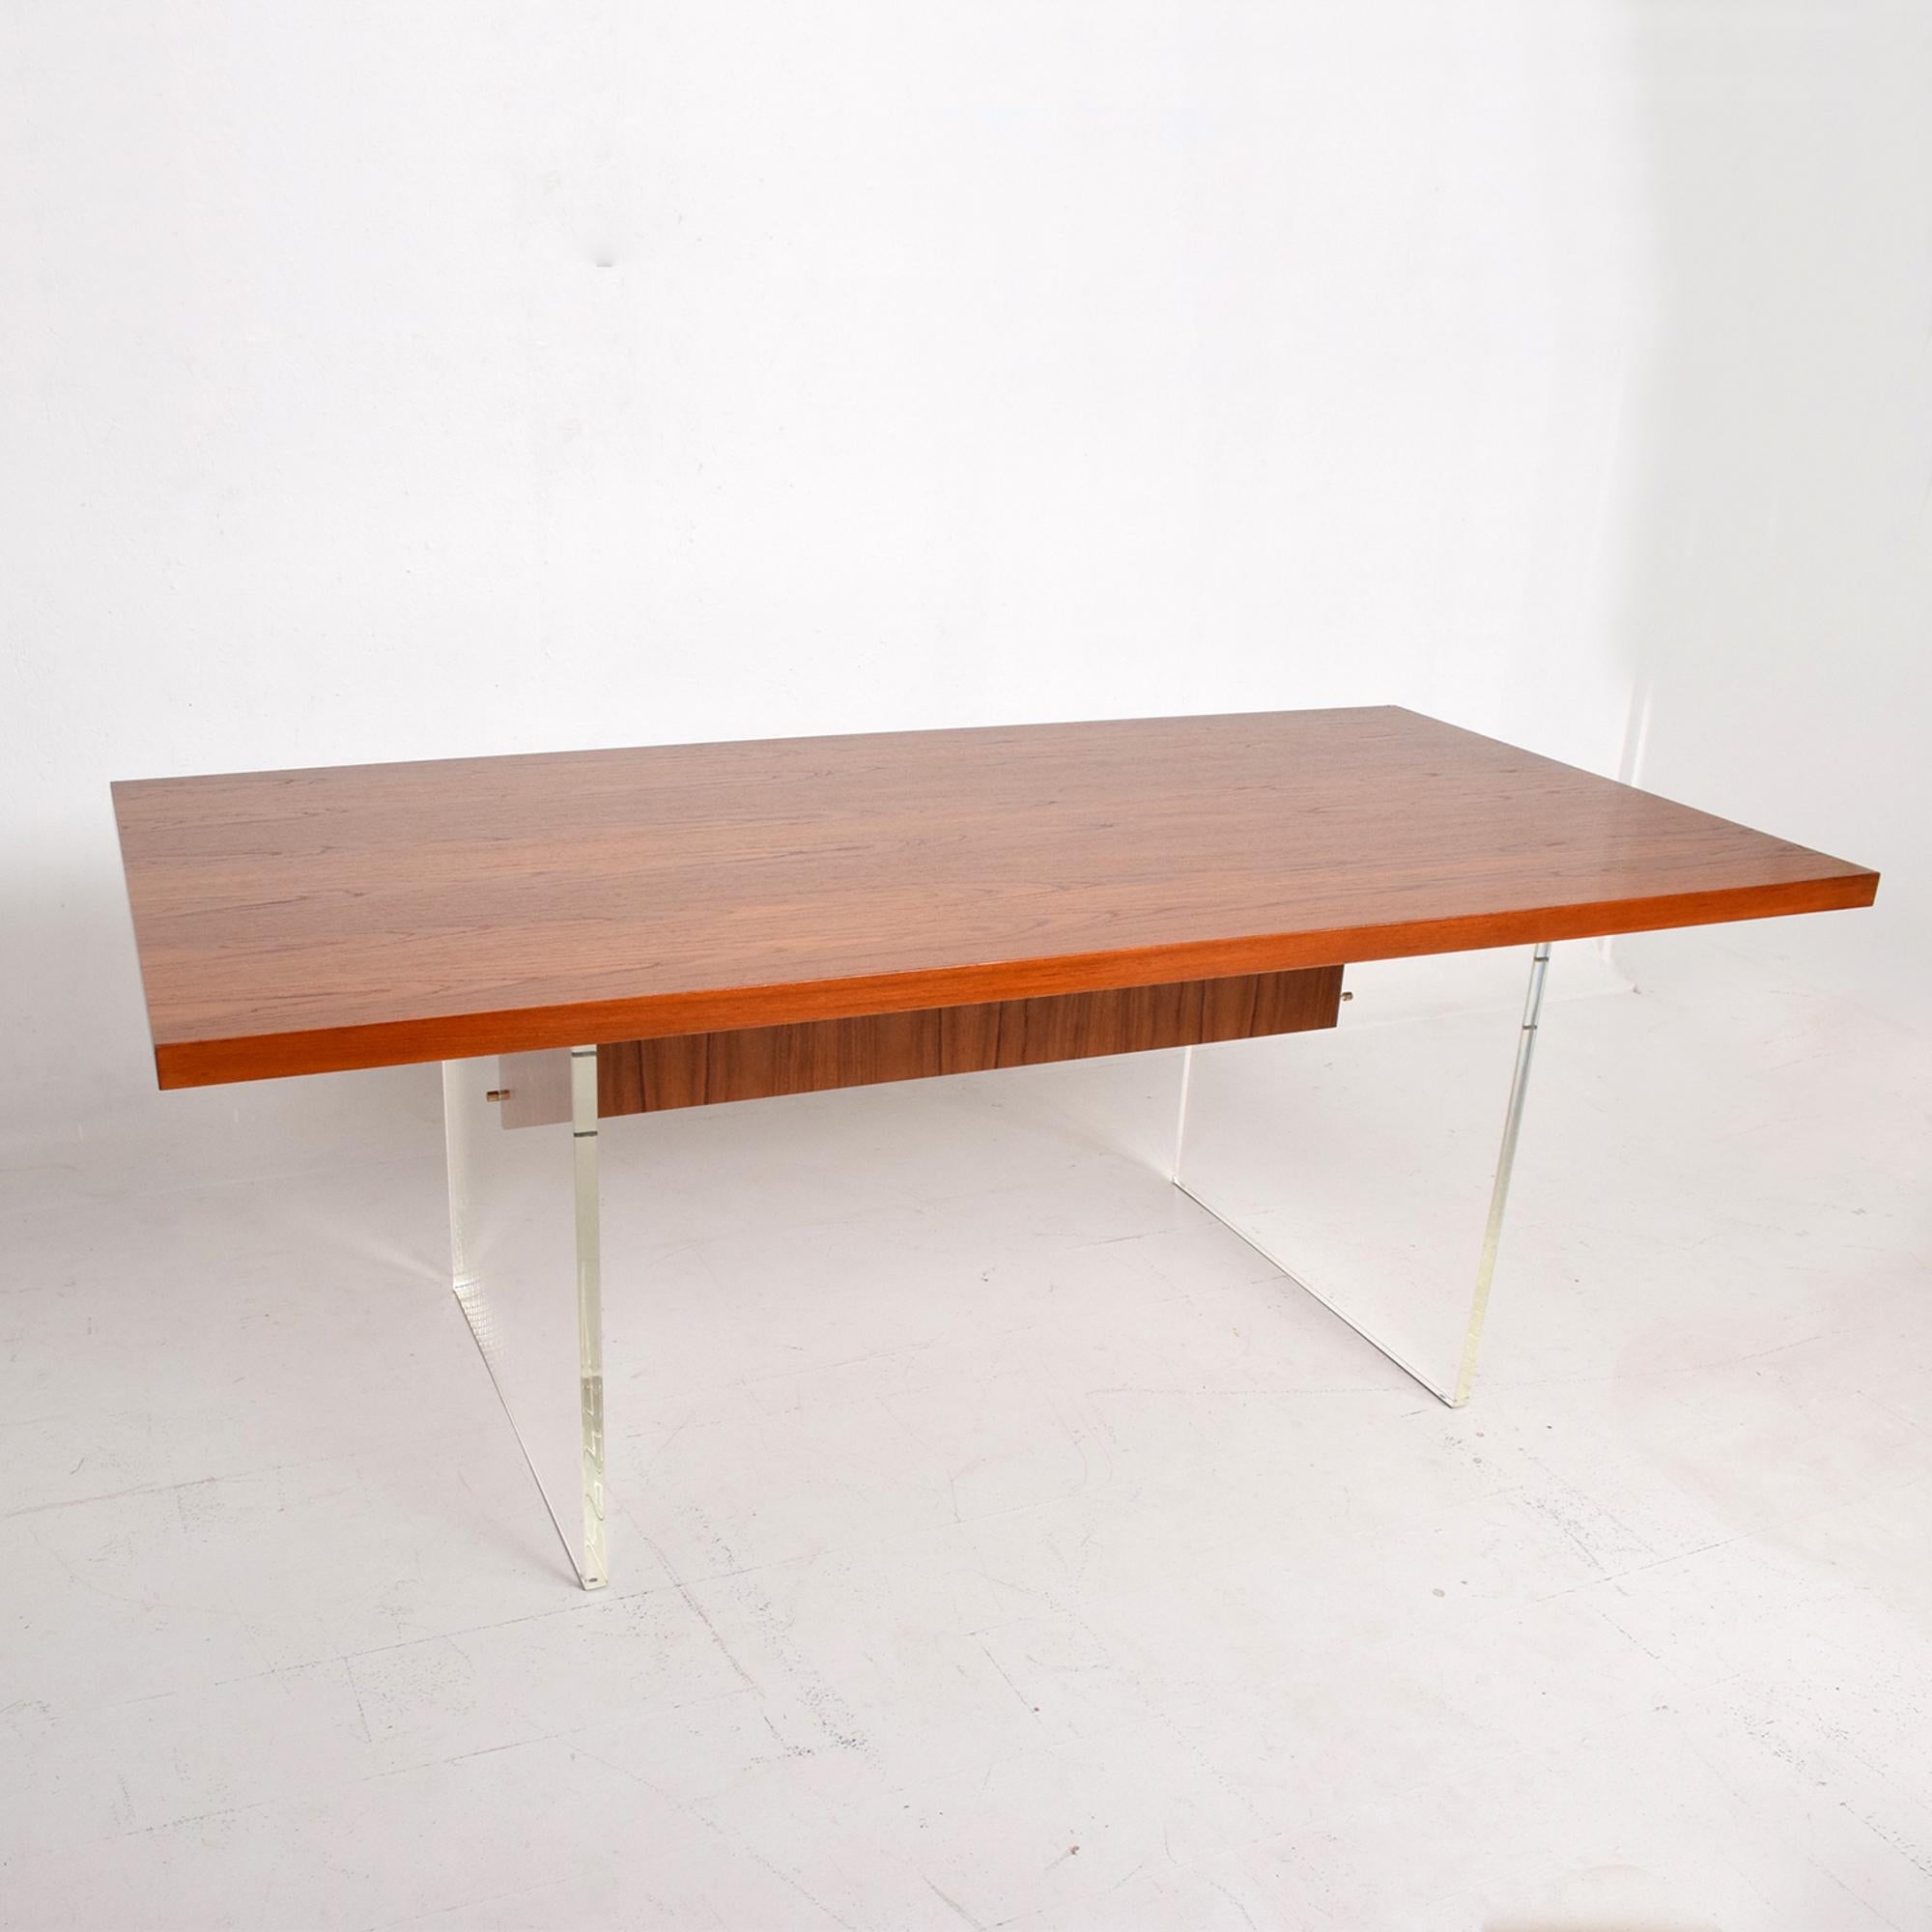 AMBIANIC presents
After Hans Wegner Dining Table Conference Table Teakwood with Lucite support base. Solid brass hardware. Circa 1970s.
Stunning presentation.
Lucite legs are in excellent condition.
Unmarked. No stamp present.
39.38 x 70.75 x 29